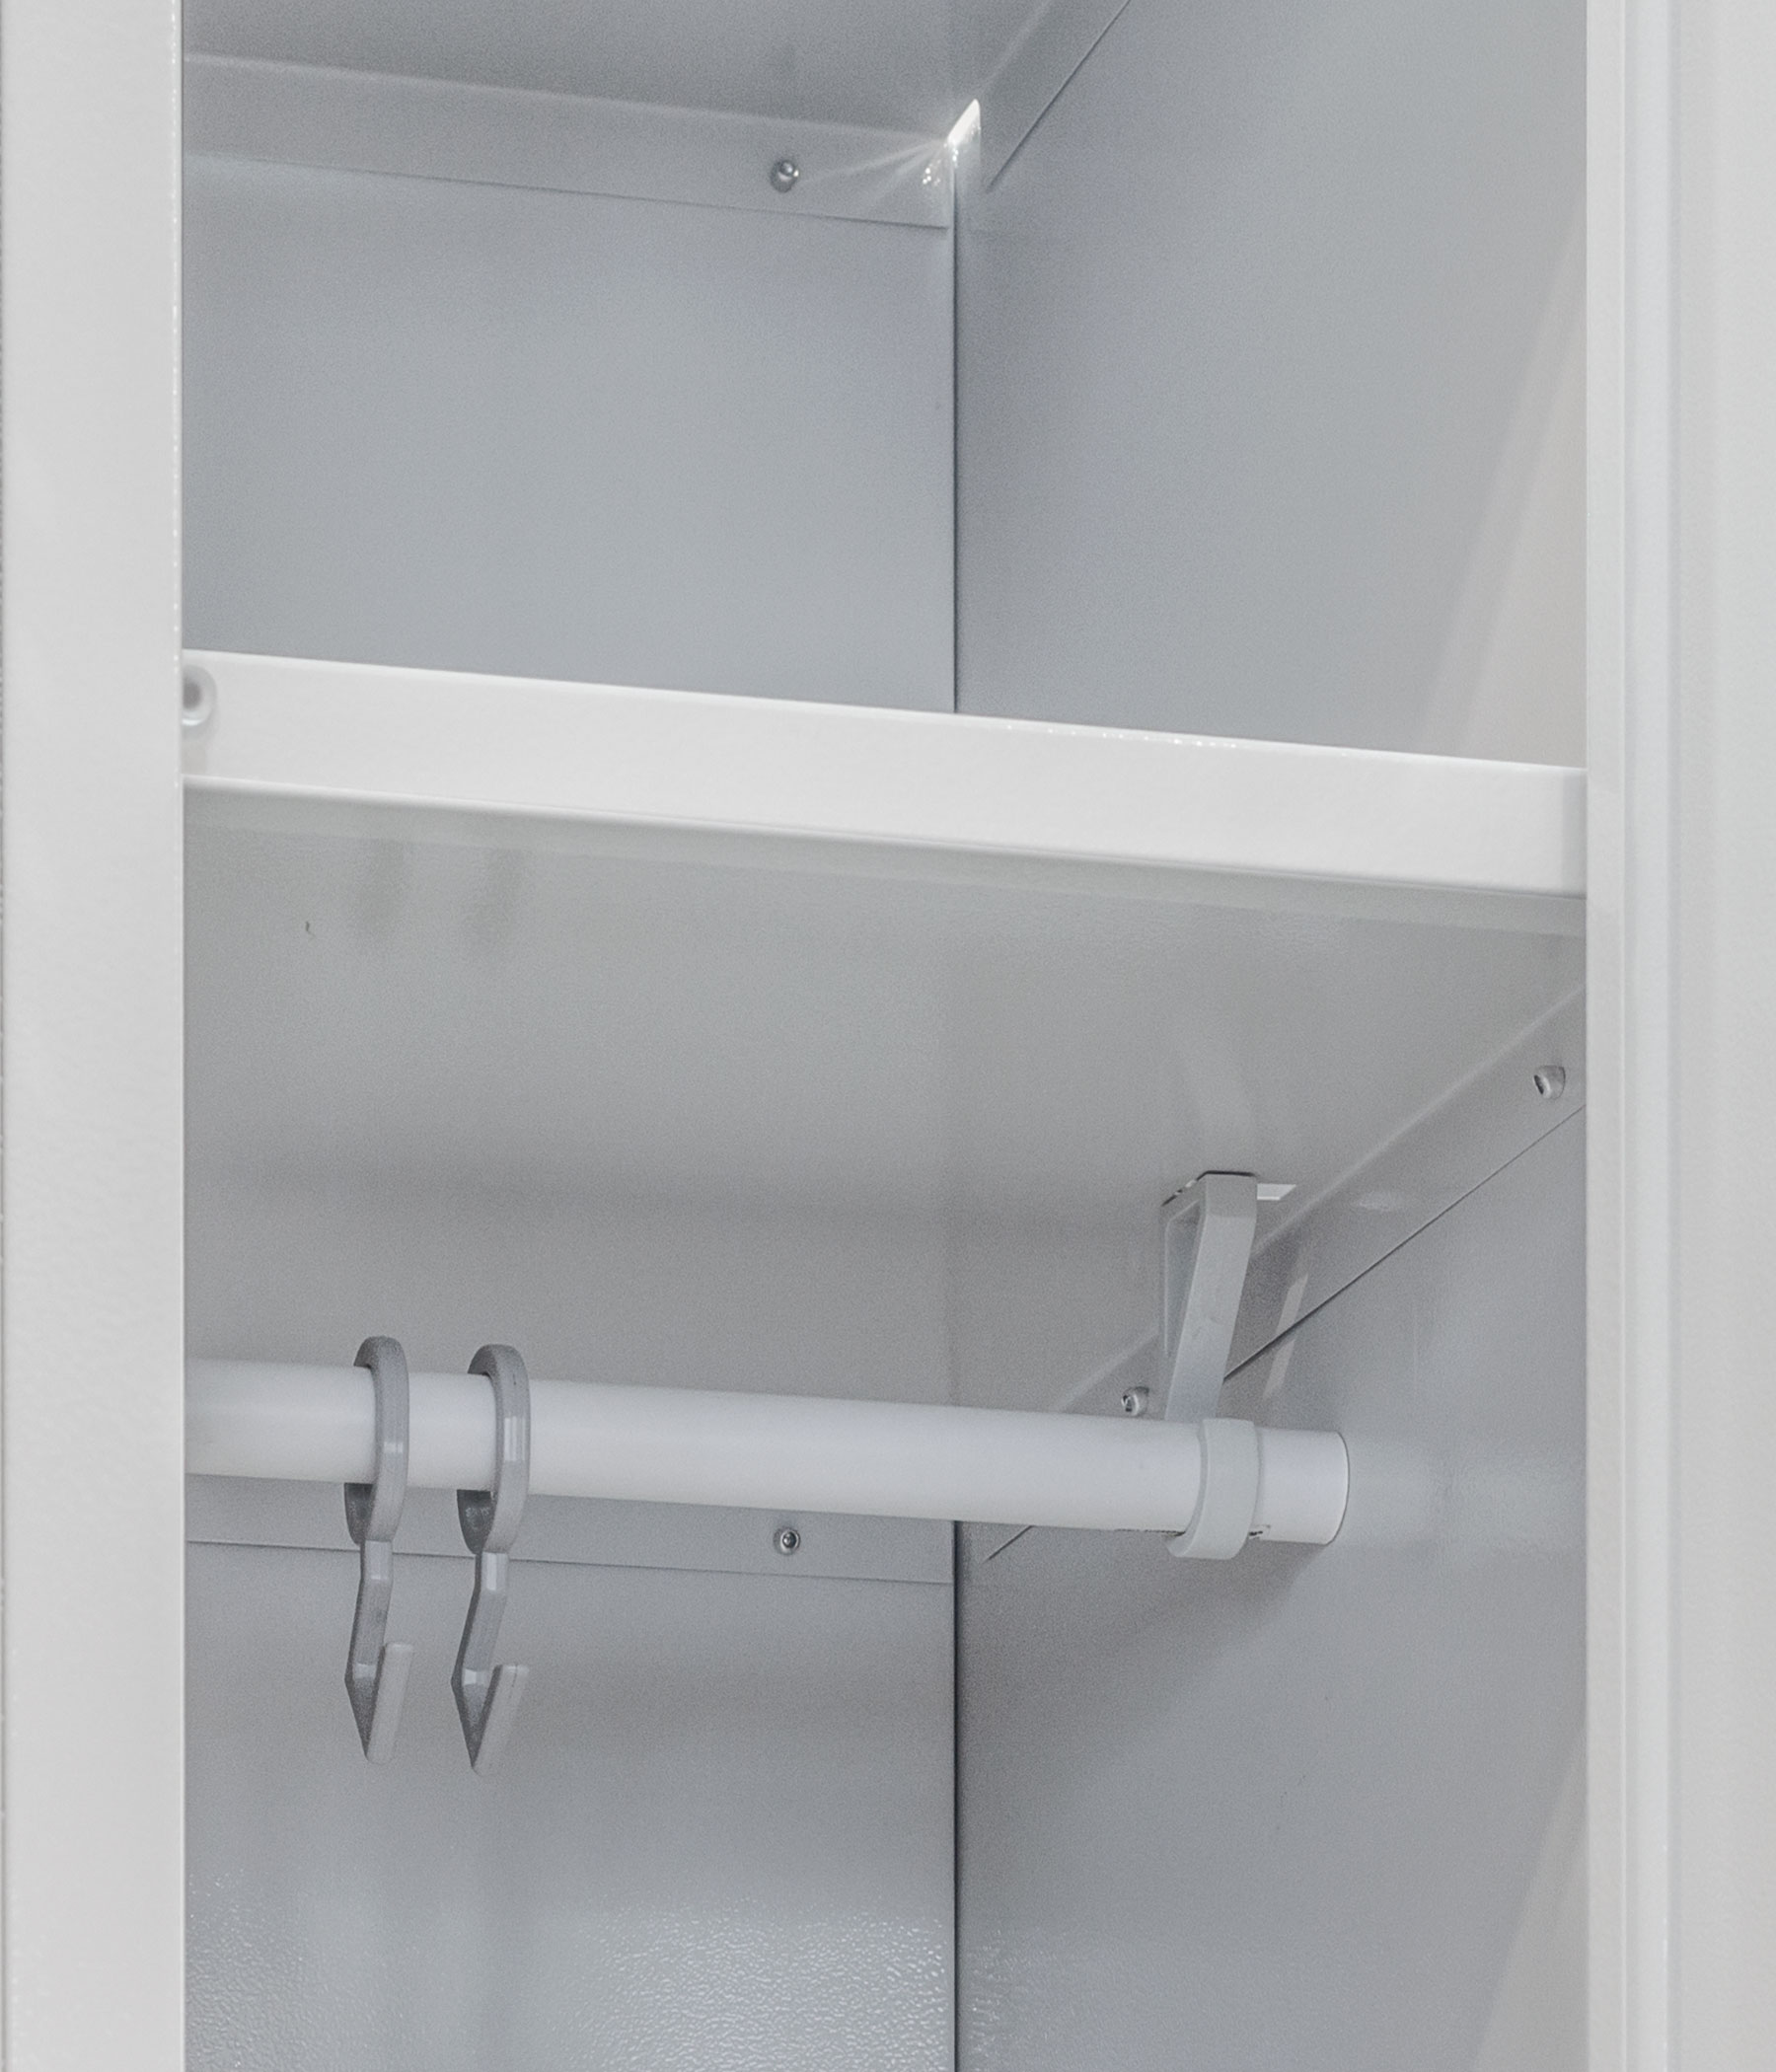 Shelf and pipe for clothes inside the wardrobe of clothing metal SOM